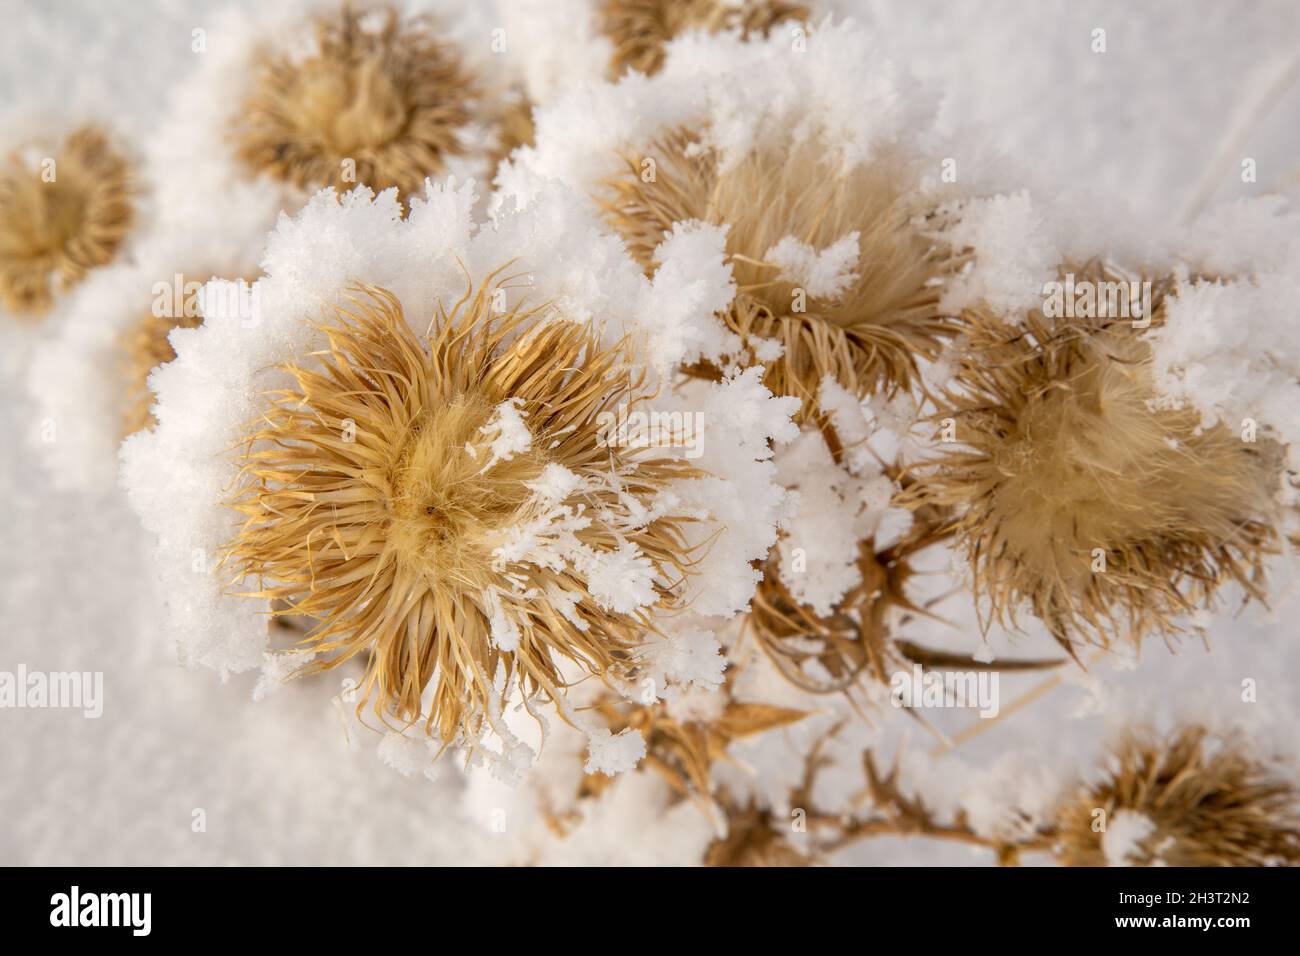 A thorny wild plant frozen during the rime. Stock Photo